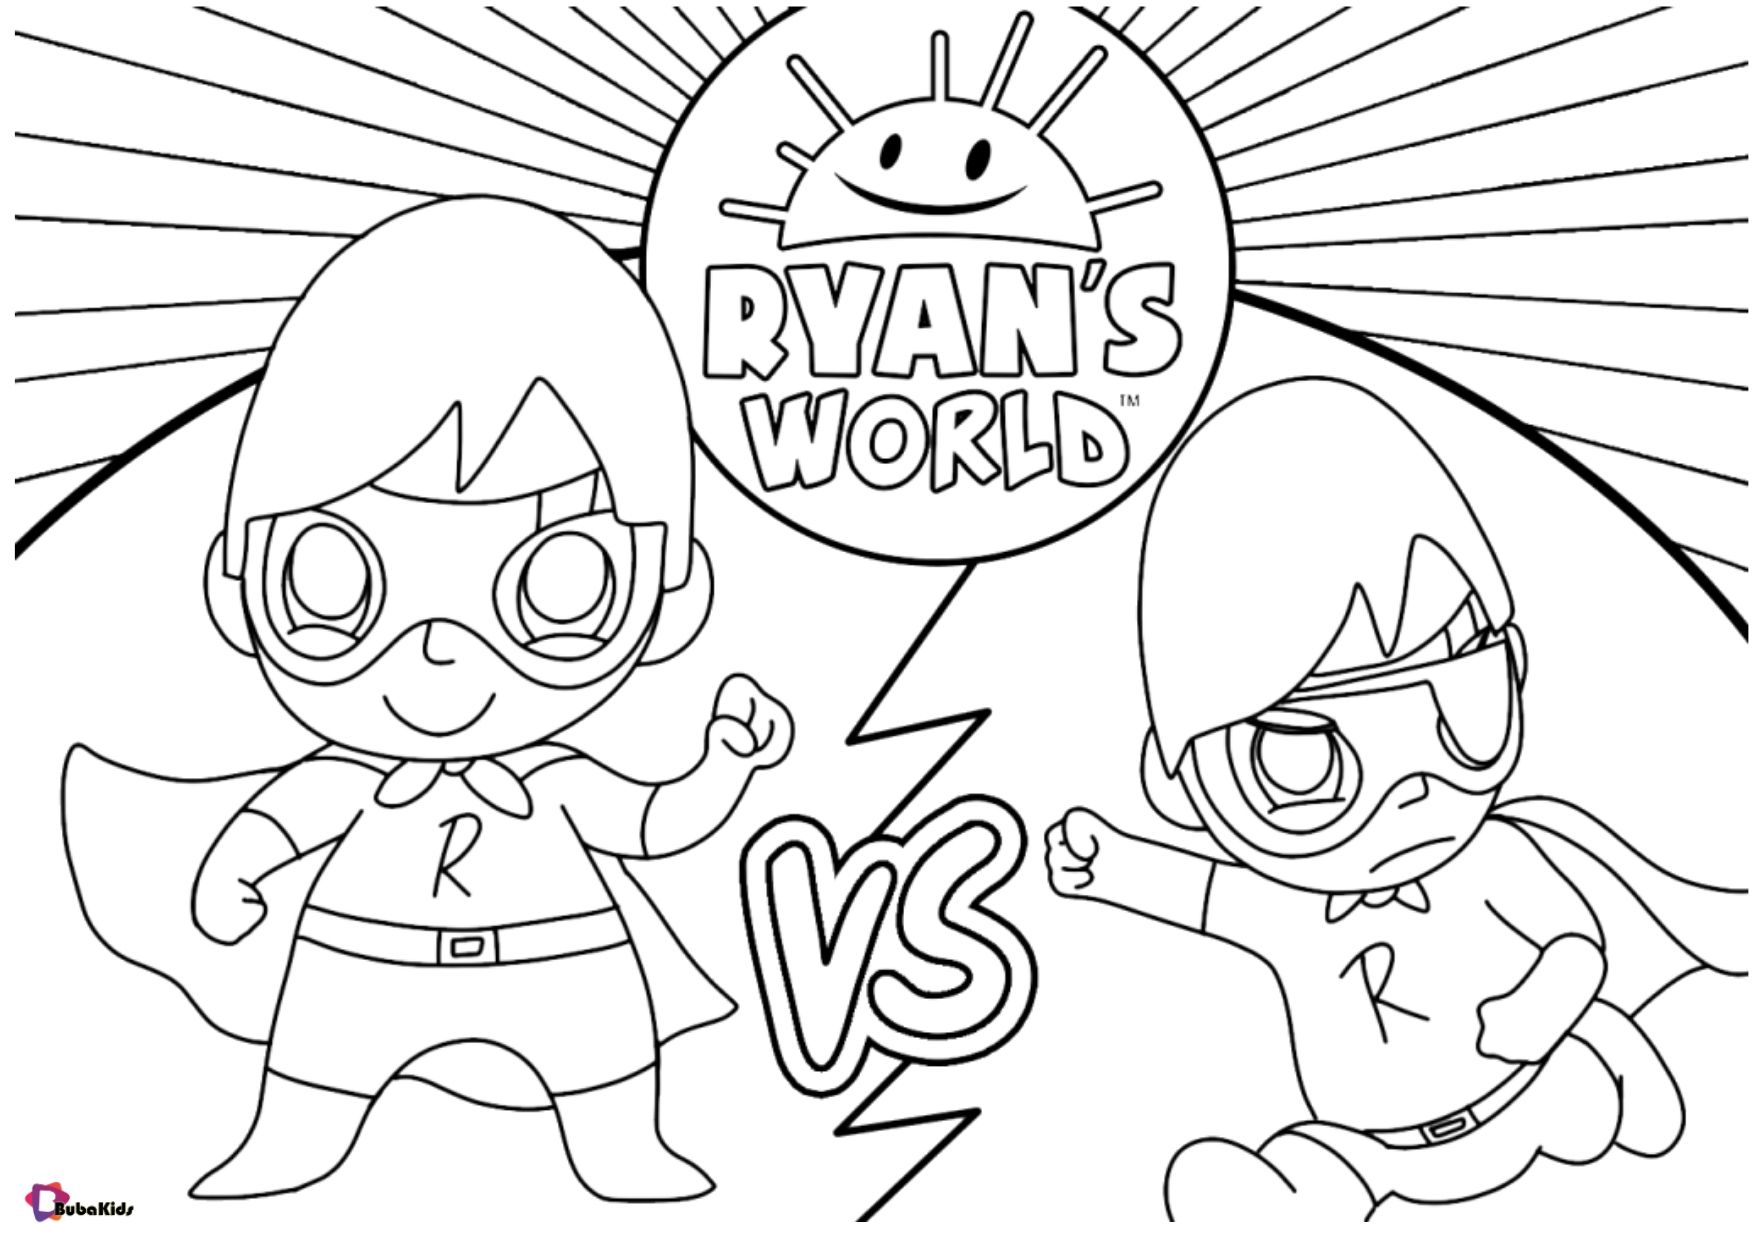 Free download ryans world coloring page for kids collection of cartoon coloring pageâ christmas coloring pages superhero coloring pages cartoon coloring pages